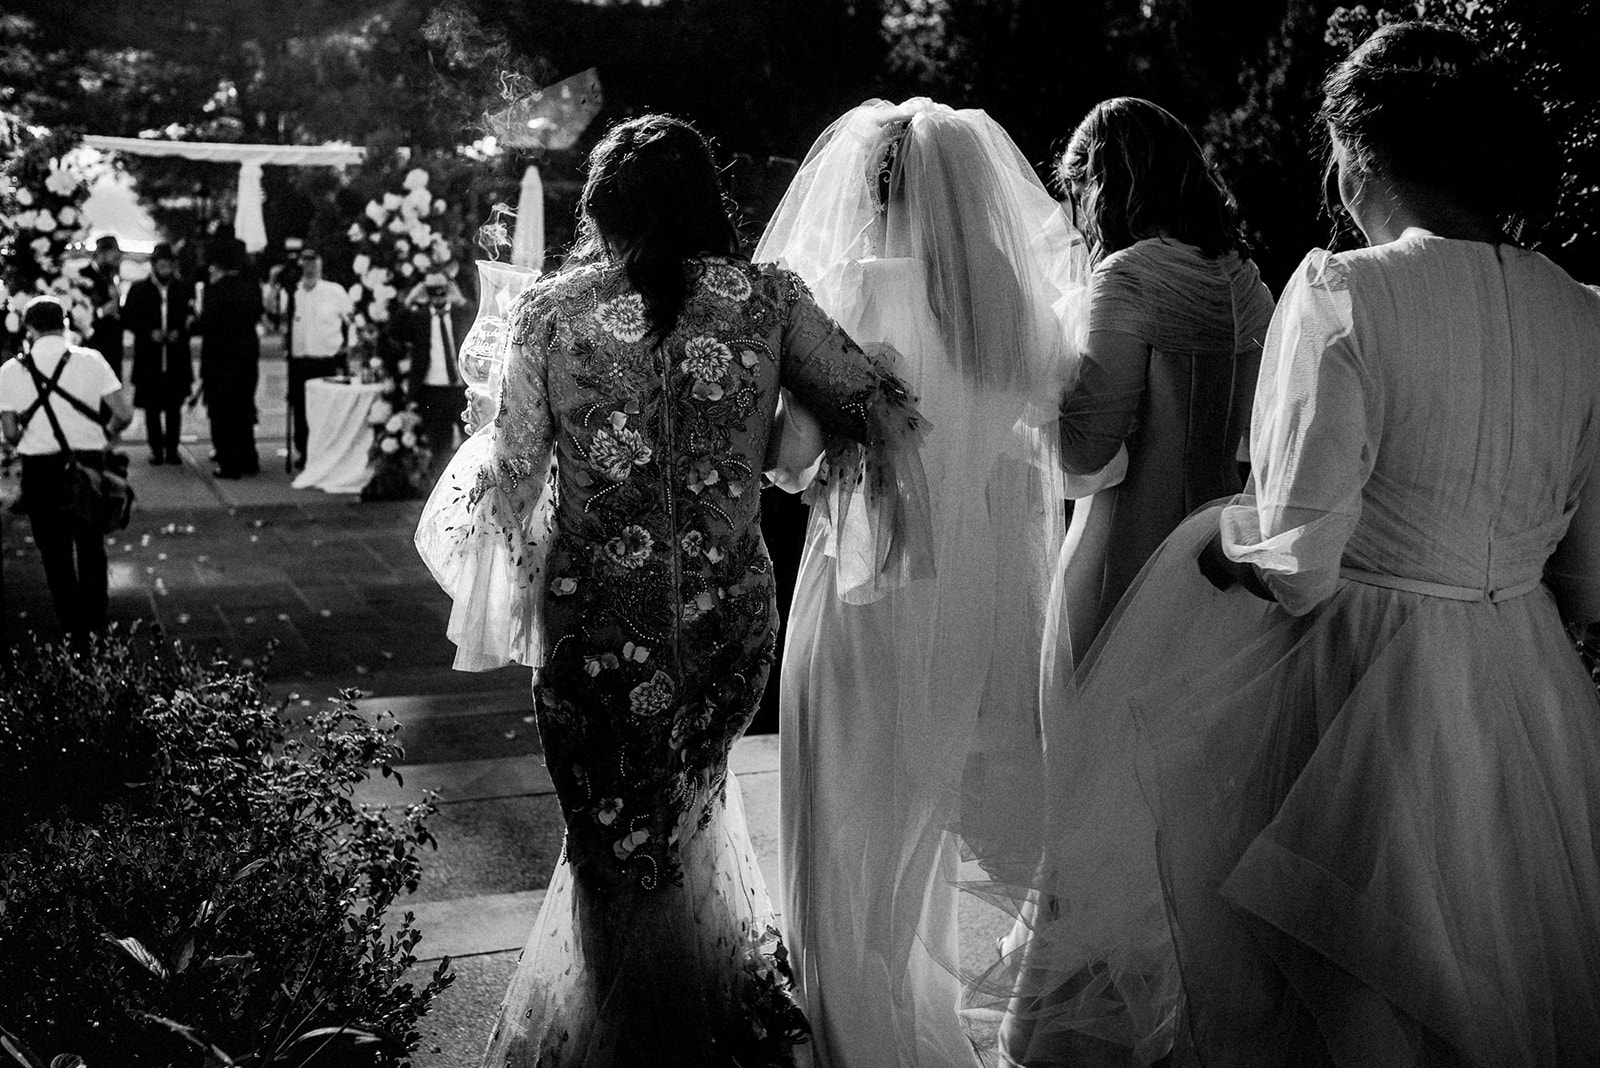 bride beautifully back lit and photographed from behind as she enters the chuppah ceremony